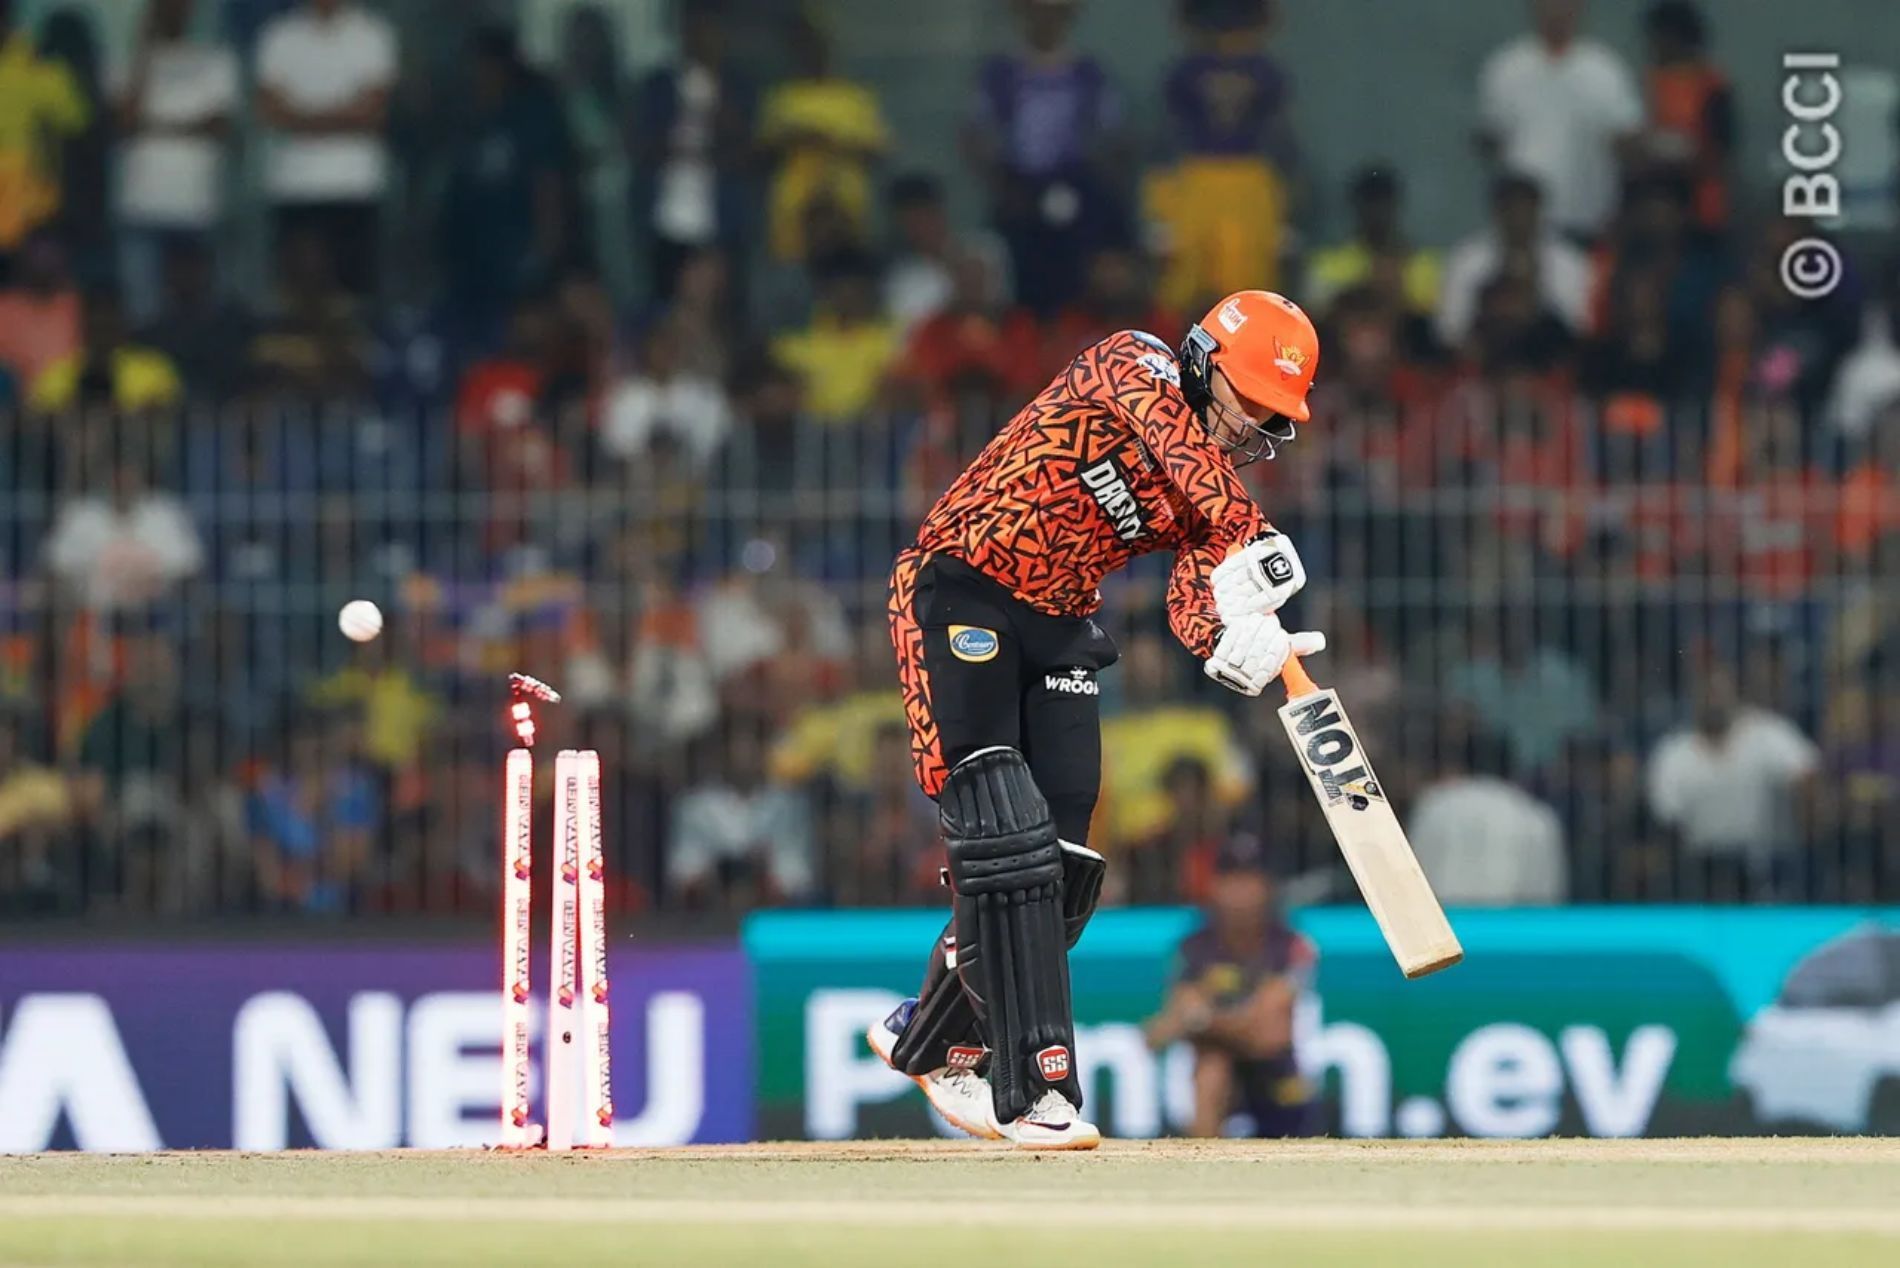 Abhishek Sharma was bowled by a ripper from Mitchell Starc. (Image Credit: BCCI/ iplt20.com)